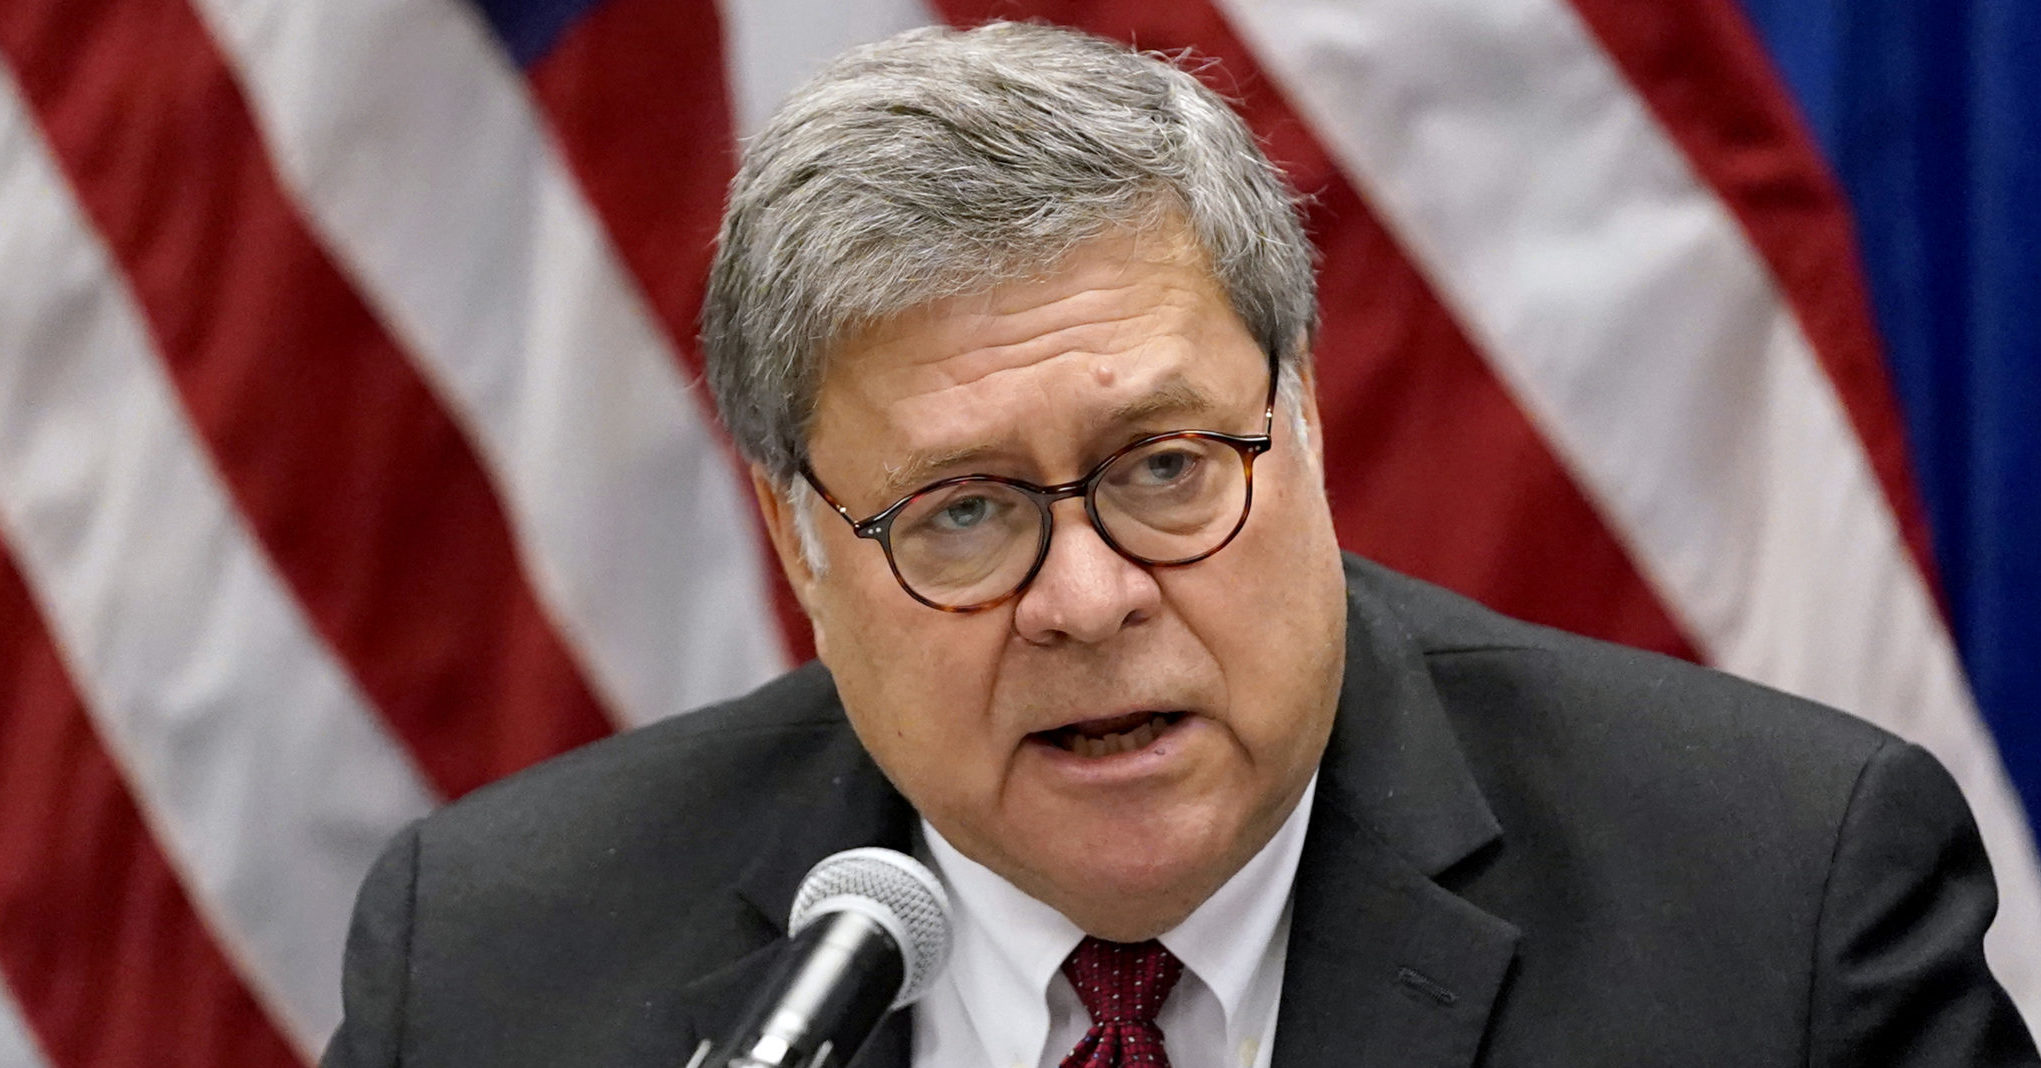 Attorney General William Barr speaks during a roundtable discussion on Operation Legend, a federal program to help cities combat violent crime in St. Louis.